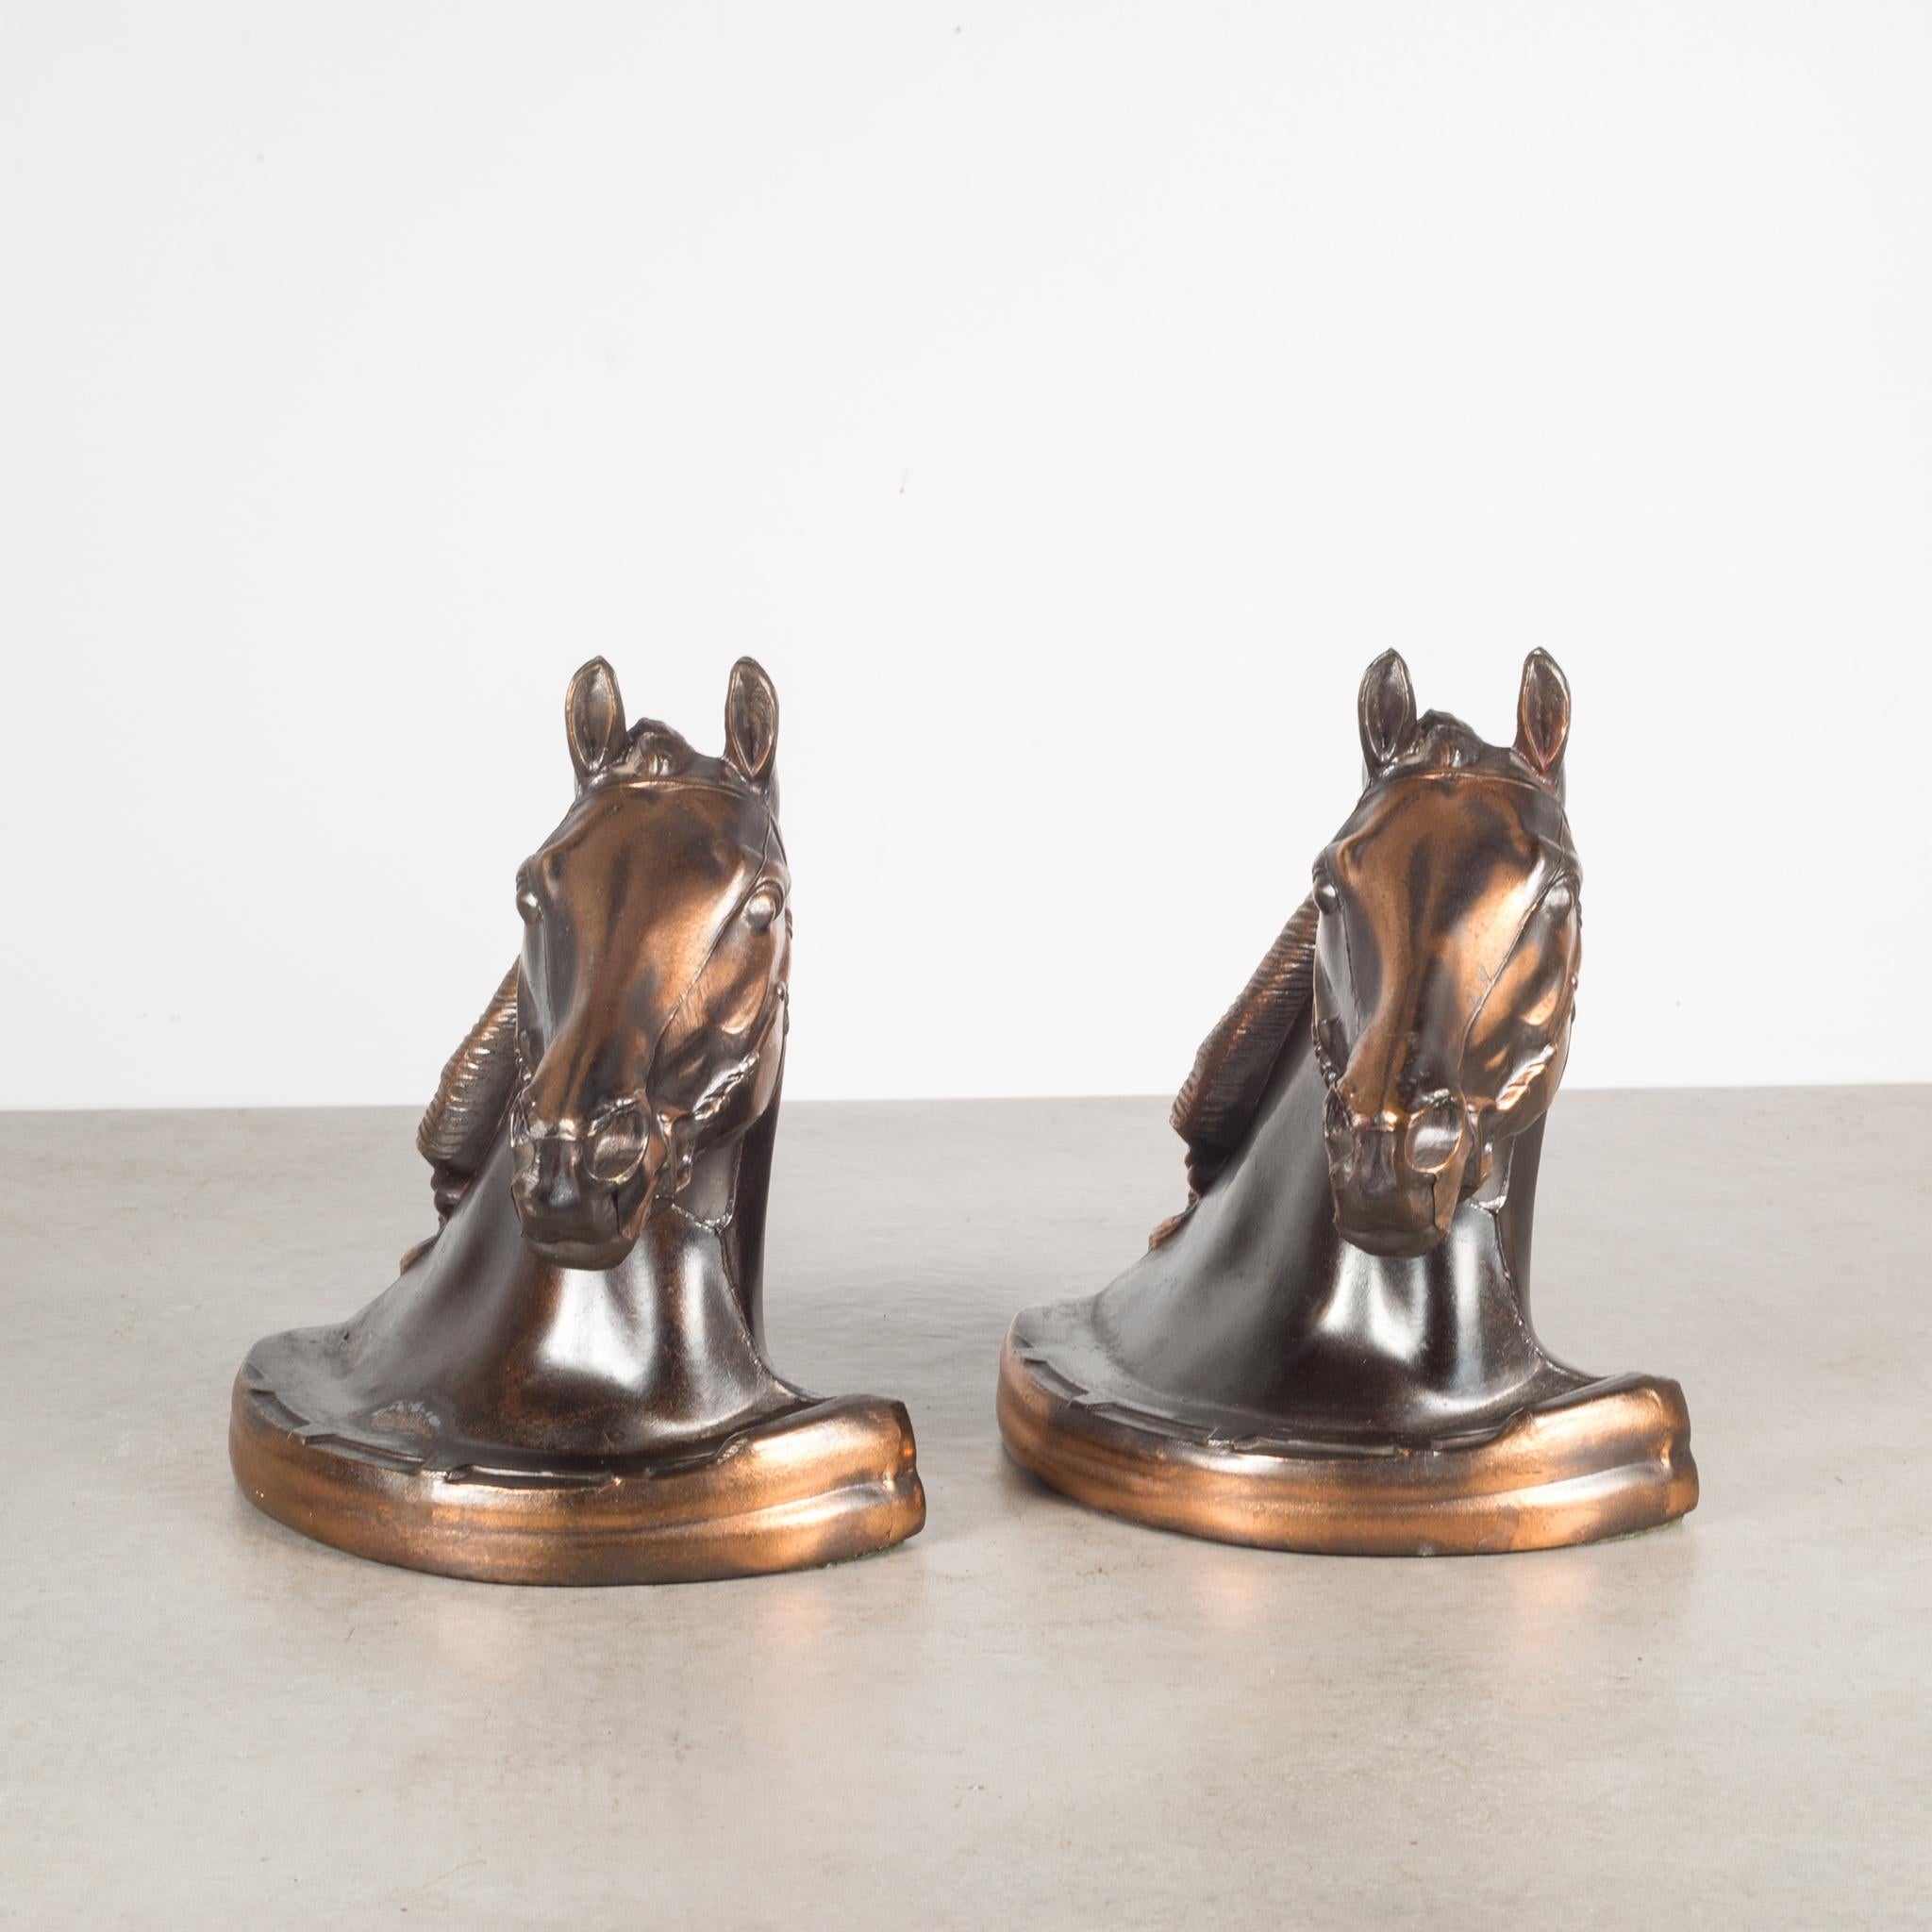 About

An original pair of Gladys Brown style metal horse head bookends with bronze and copper plate and original felt on the bottom.

